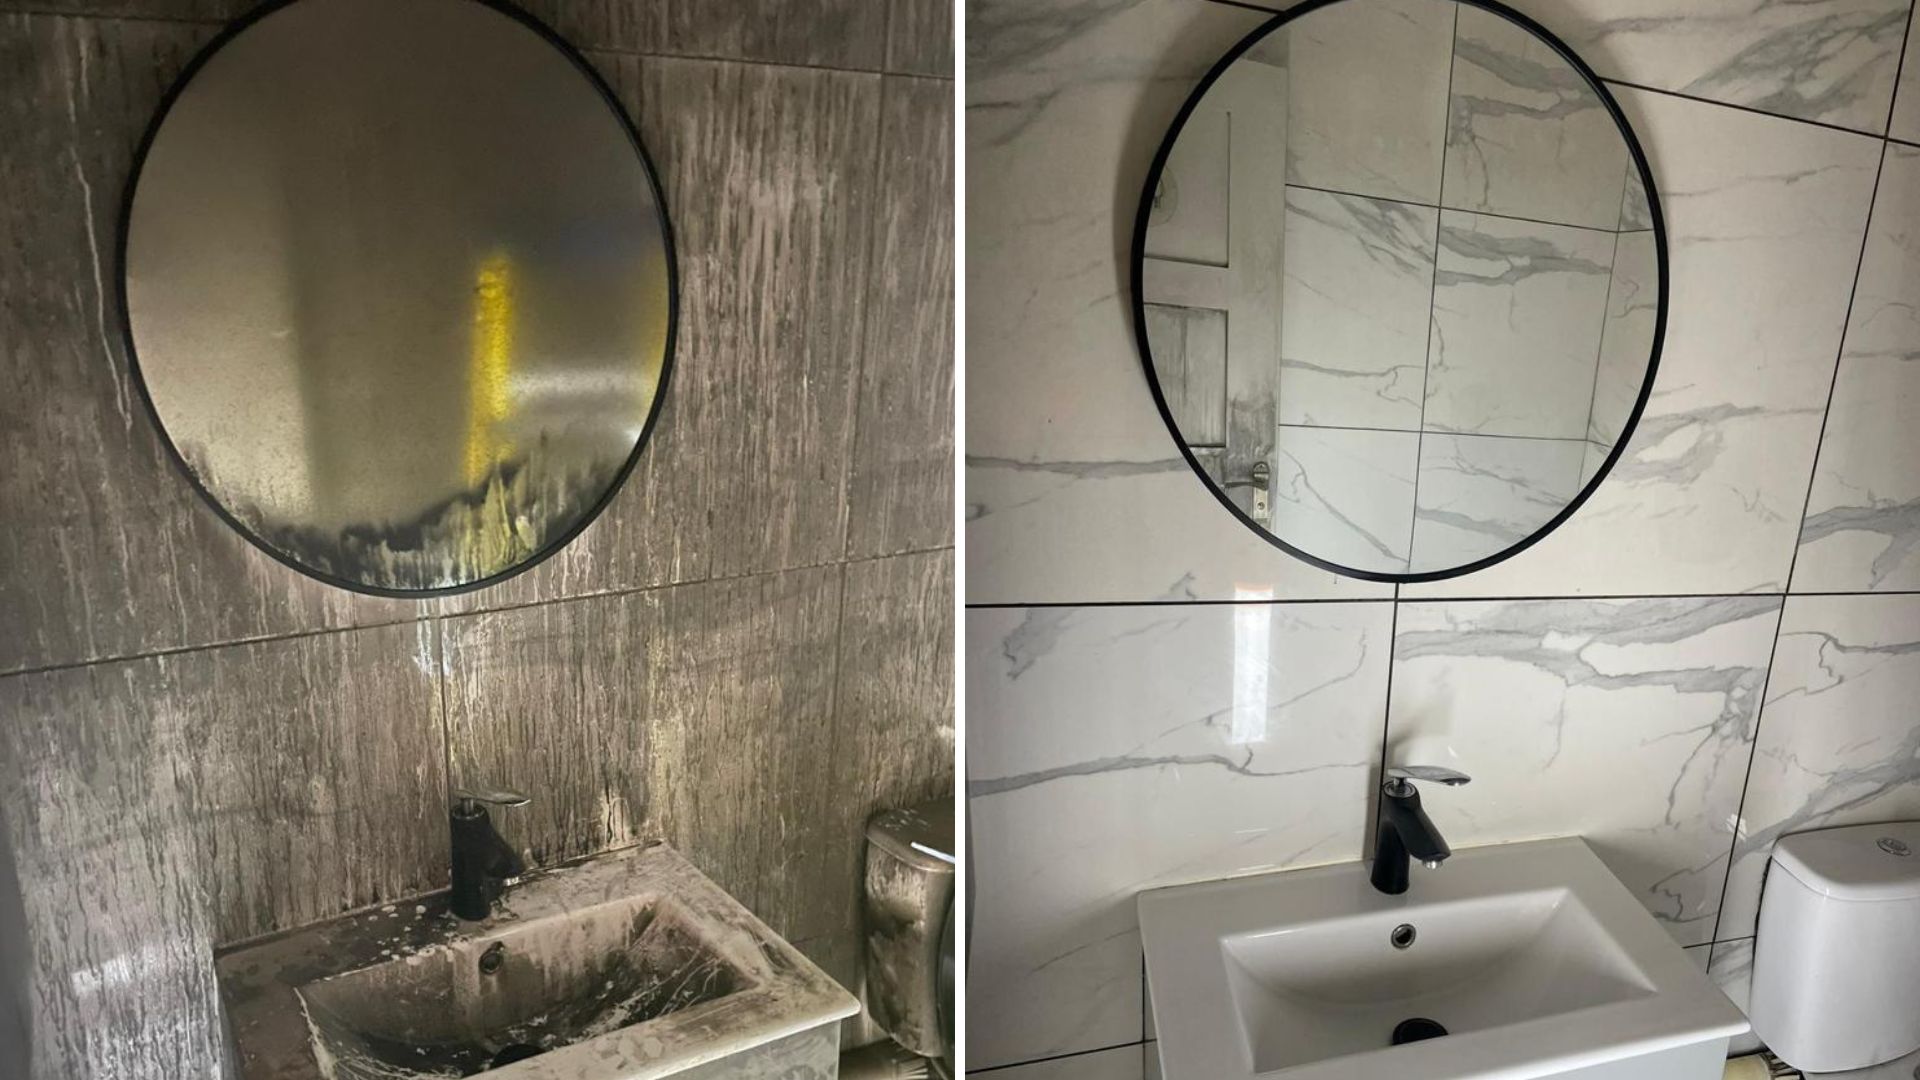 A before and after image of a fire damaged basin and mirror.